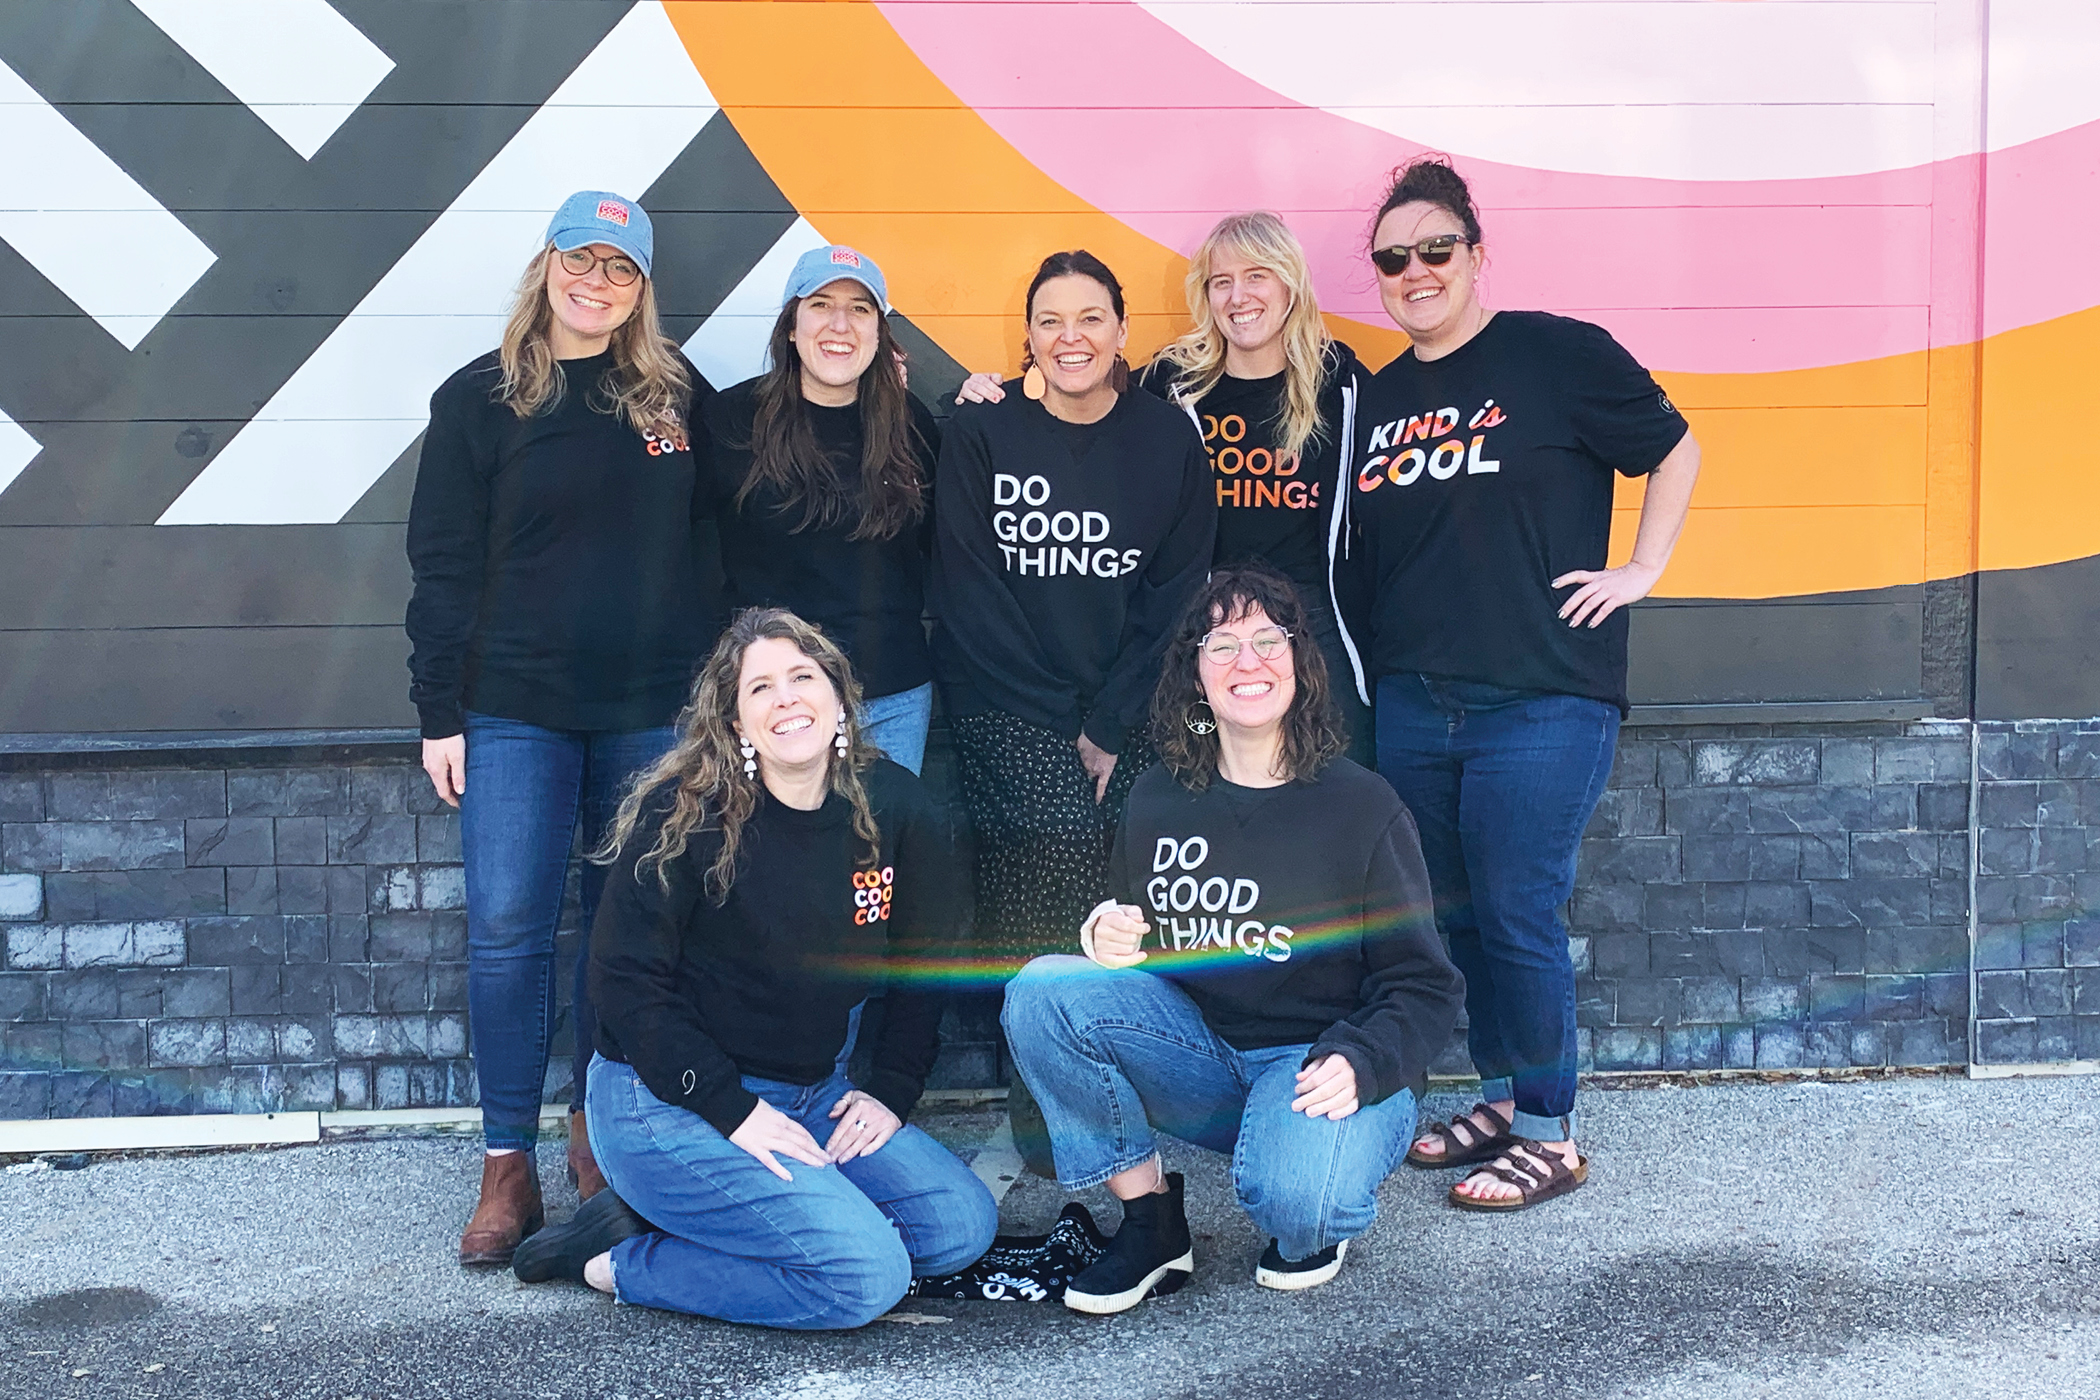 p7 team in project7 design merch in front of Cool to be kind mural in des moines